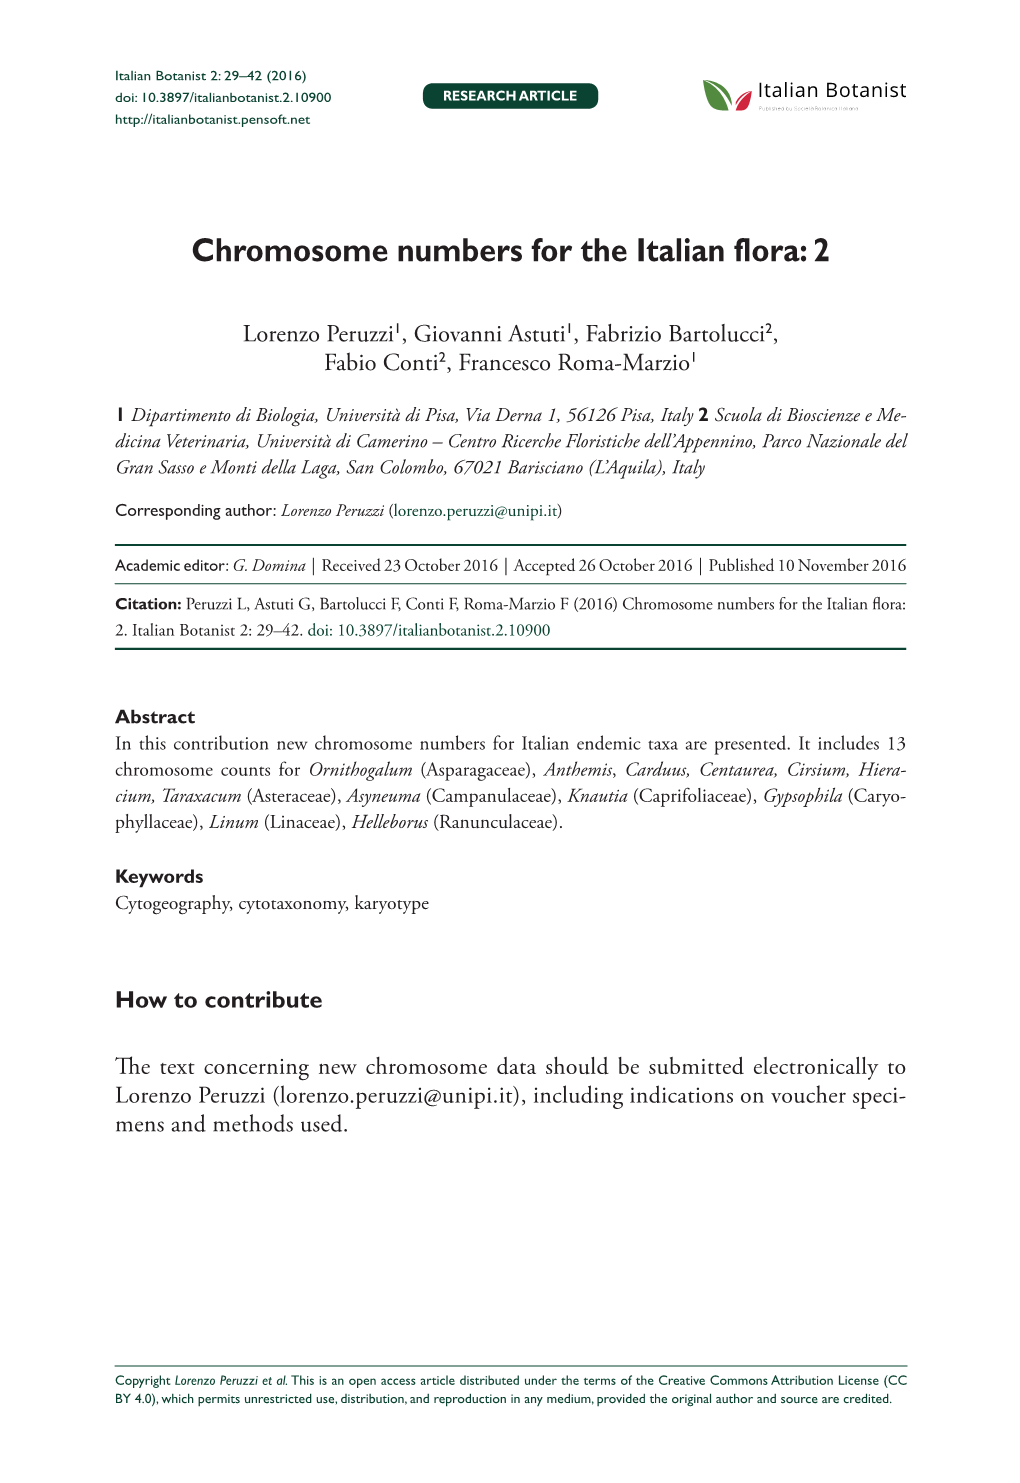 ﻿Chromosome Numbers for the Italian Flora: 2